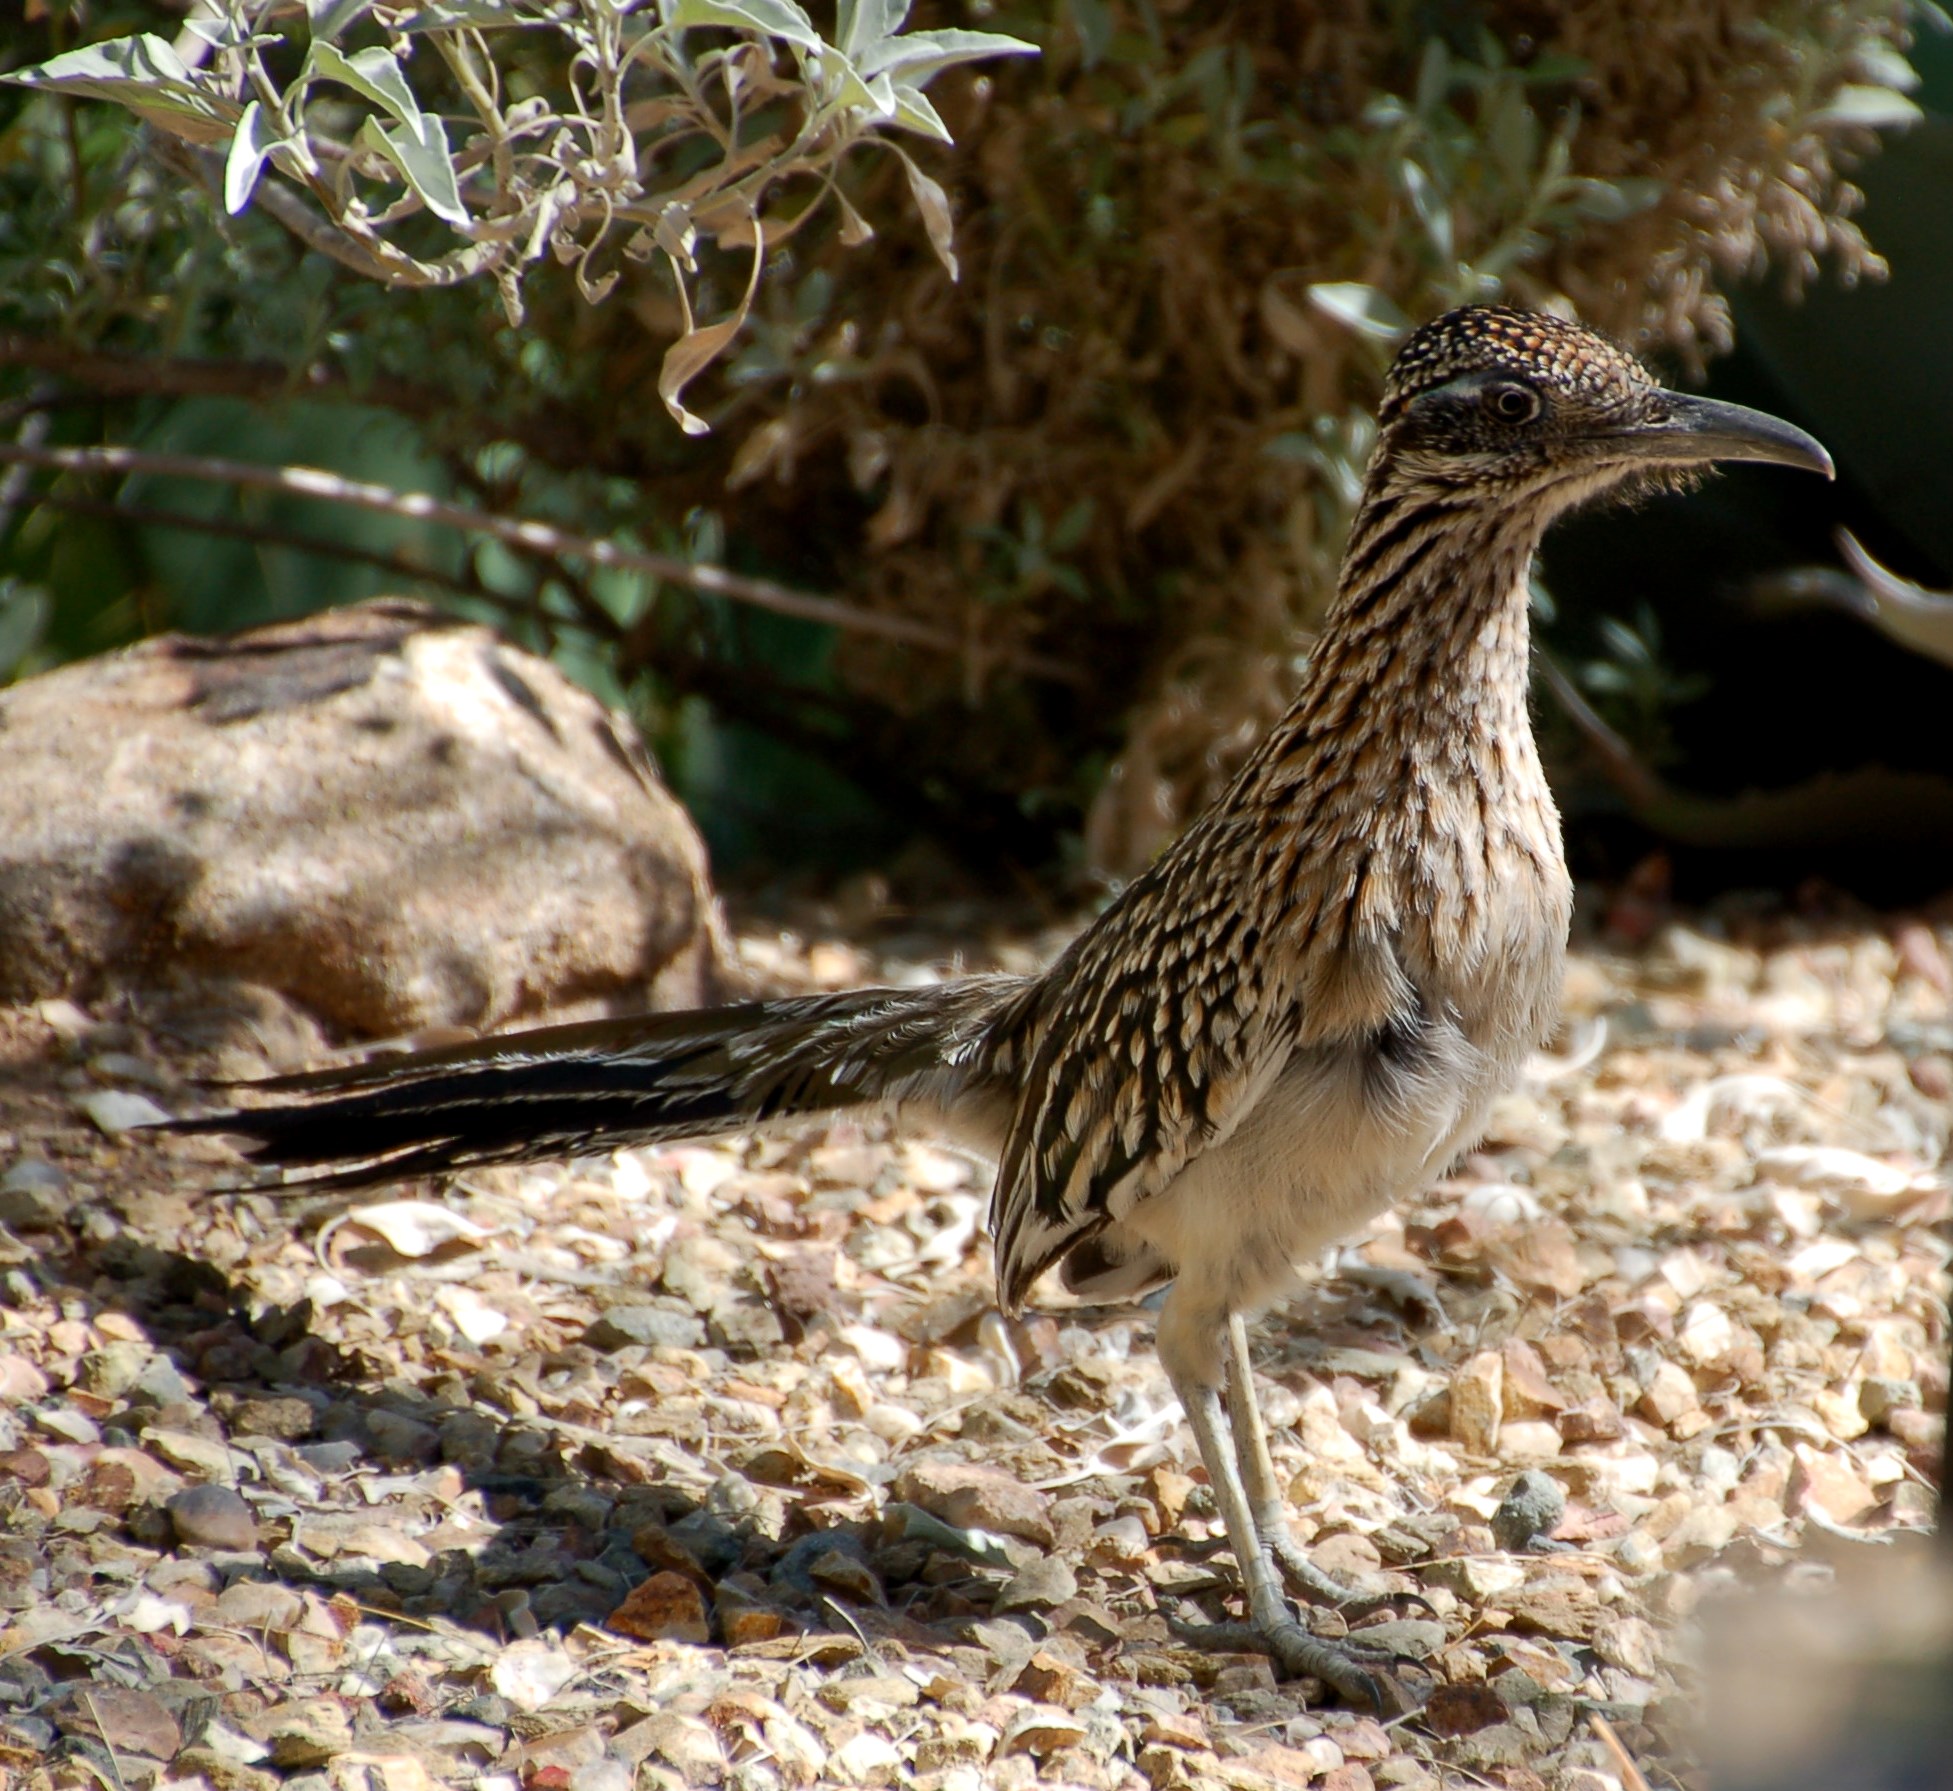 A visit from the tourist friendly Roadrunner at Gertrude's restaurant